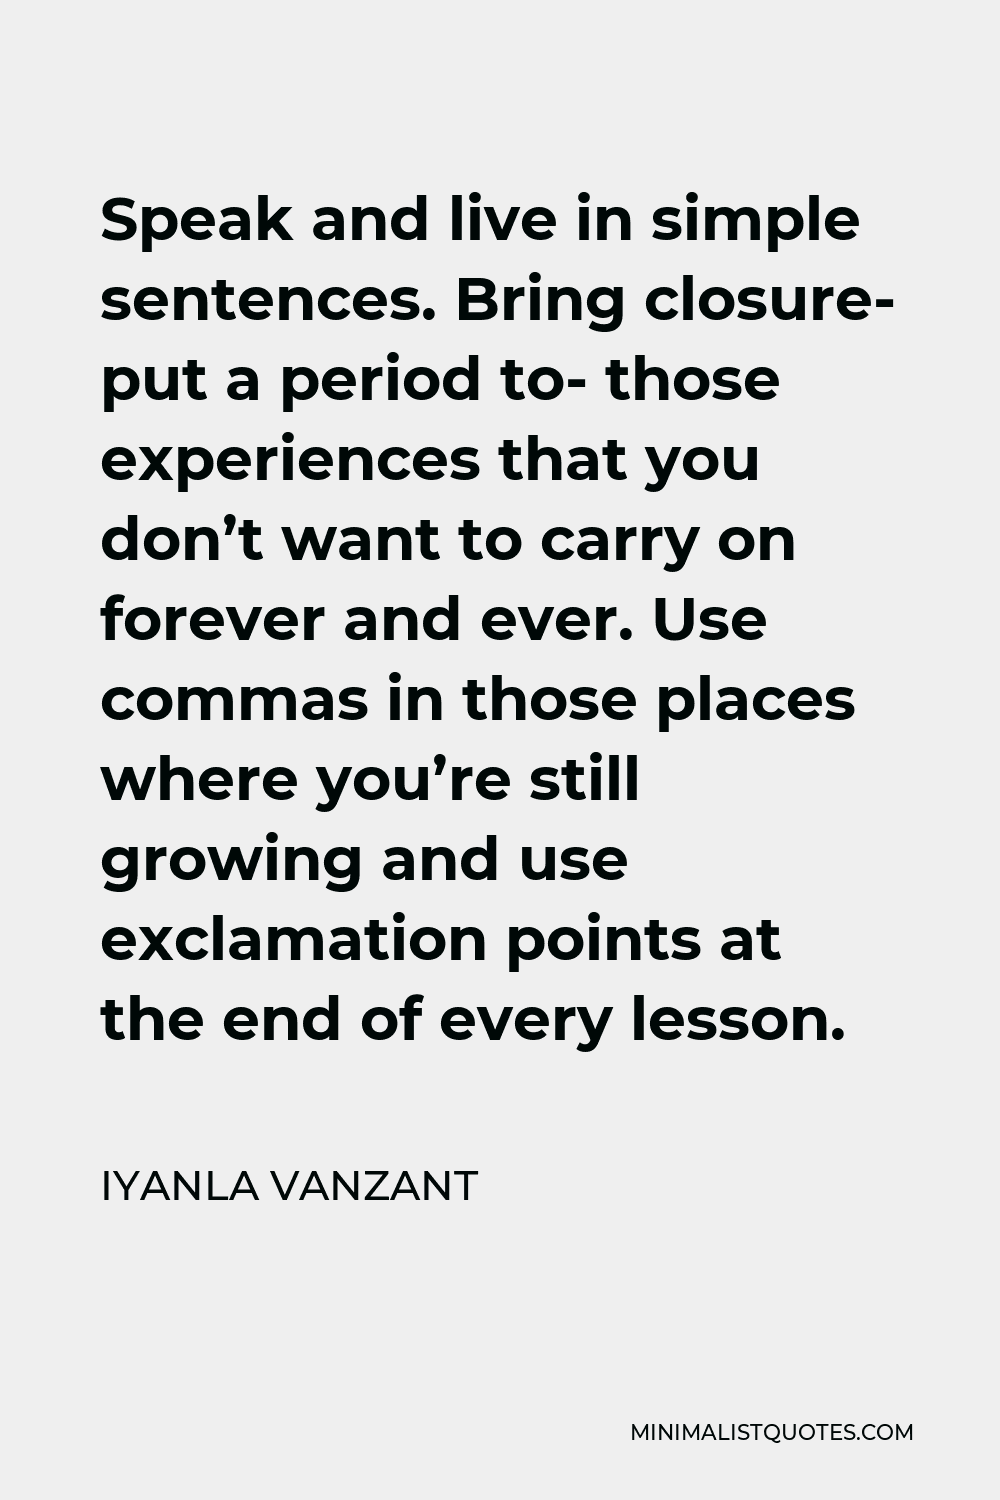 Iyanla Vanzant Quote - Speak and live in simple sentences. Bring closure- put a period to- those experiences that you don’t want to carry on forever and ever. Use commas in those places where you’re still growing and use exclamation points at the end of every lesson.